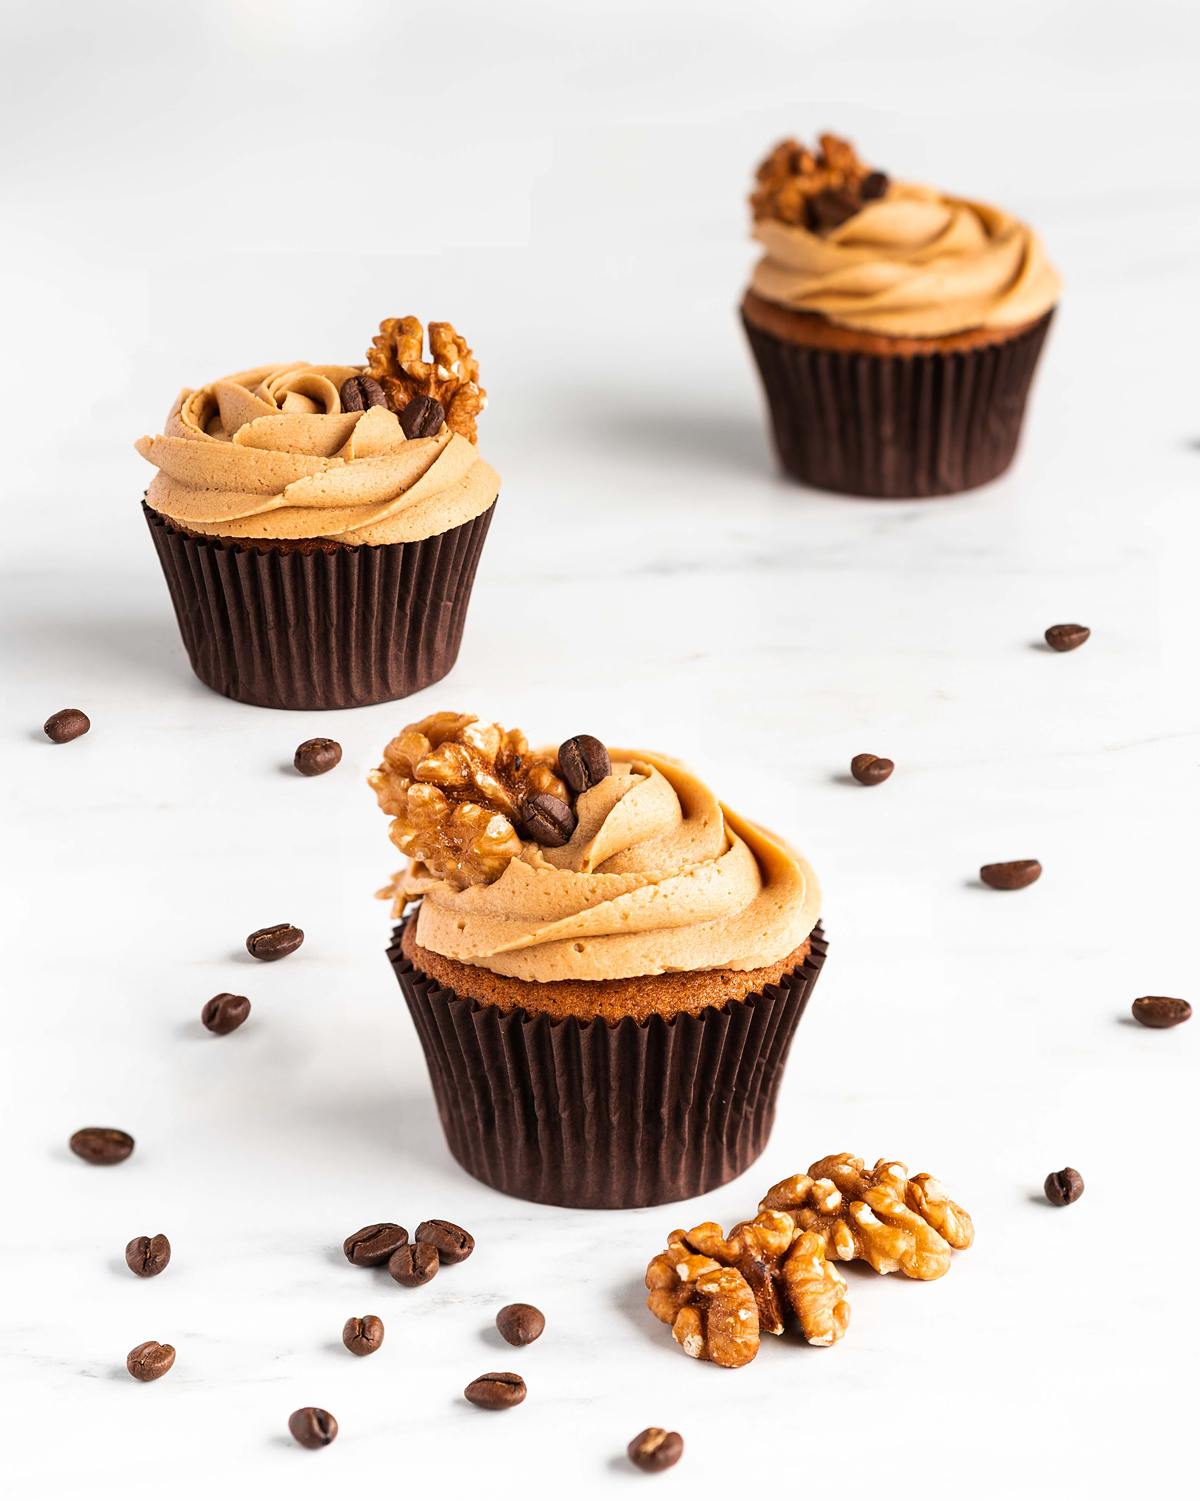 Three cupcakes staggered on a table with a sprinkling of coffee beans and walnuts surrounding them